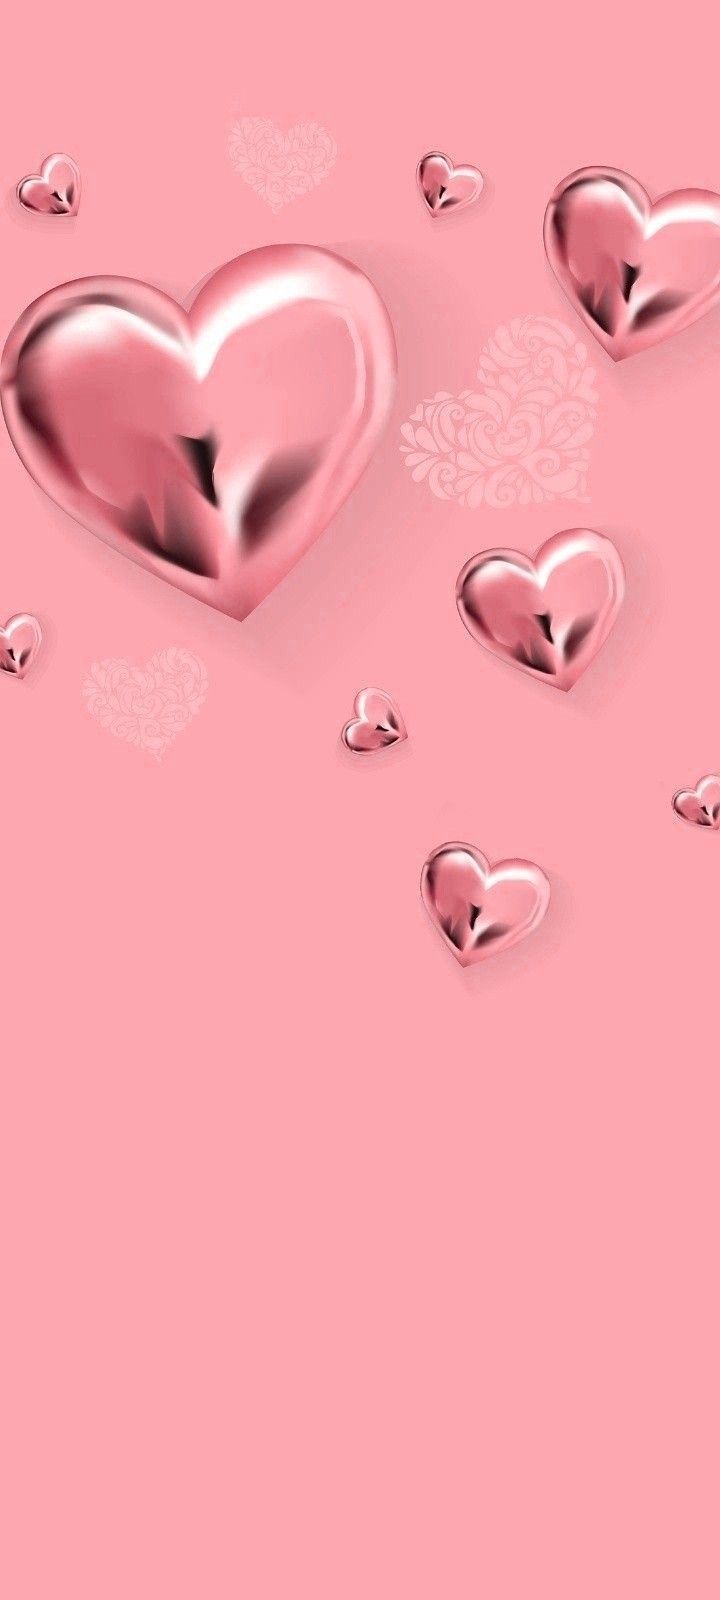 Valentines & Easter wallpaper and background❤️ ideas. easter wallpaper, heart wallpaper, valentines wallpaper